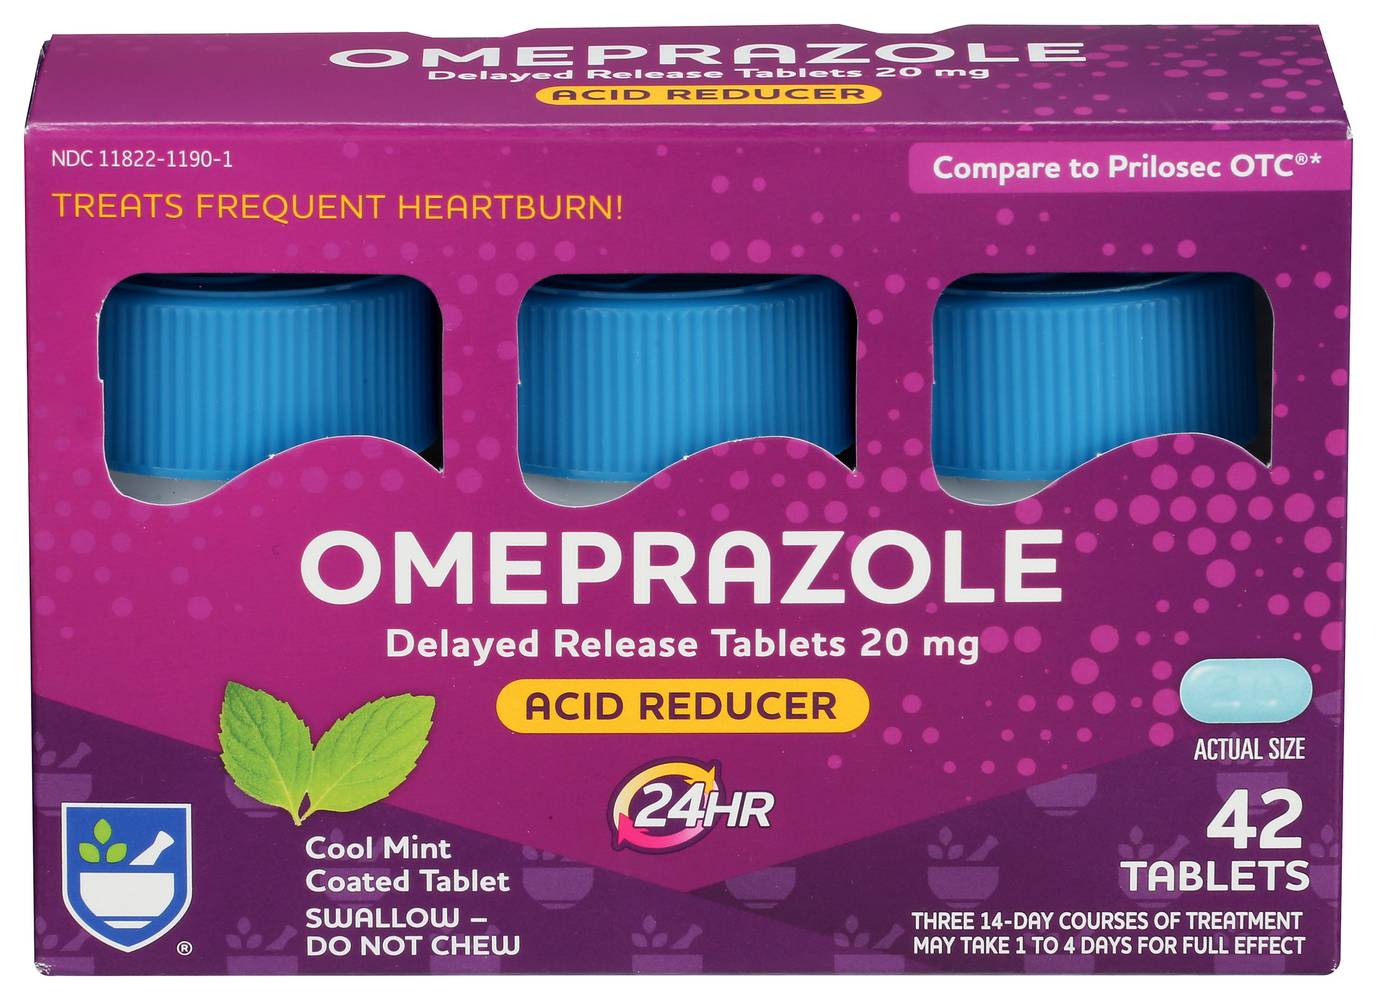 Rite Aid Cool Mint Omeprazole tablets - 42 ct